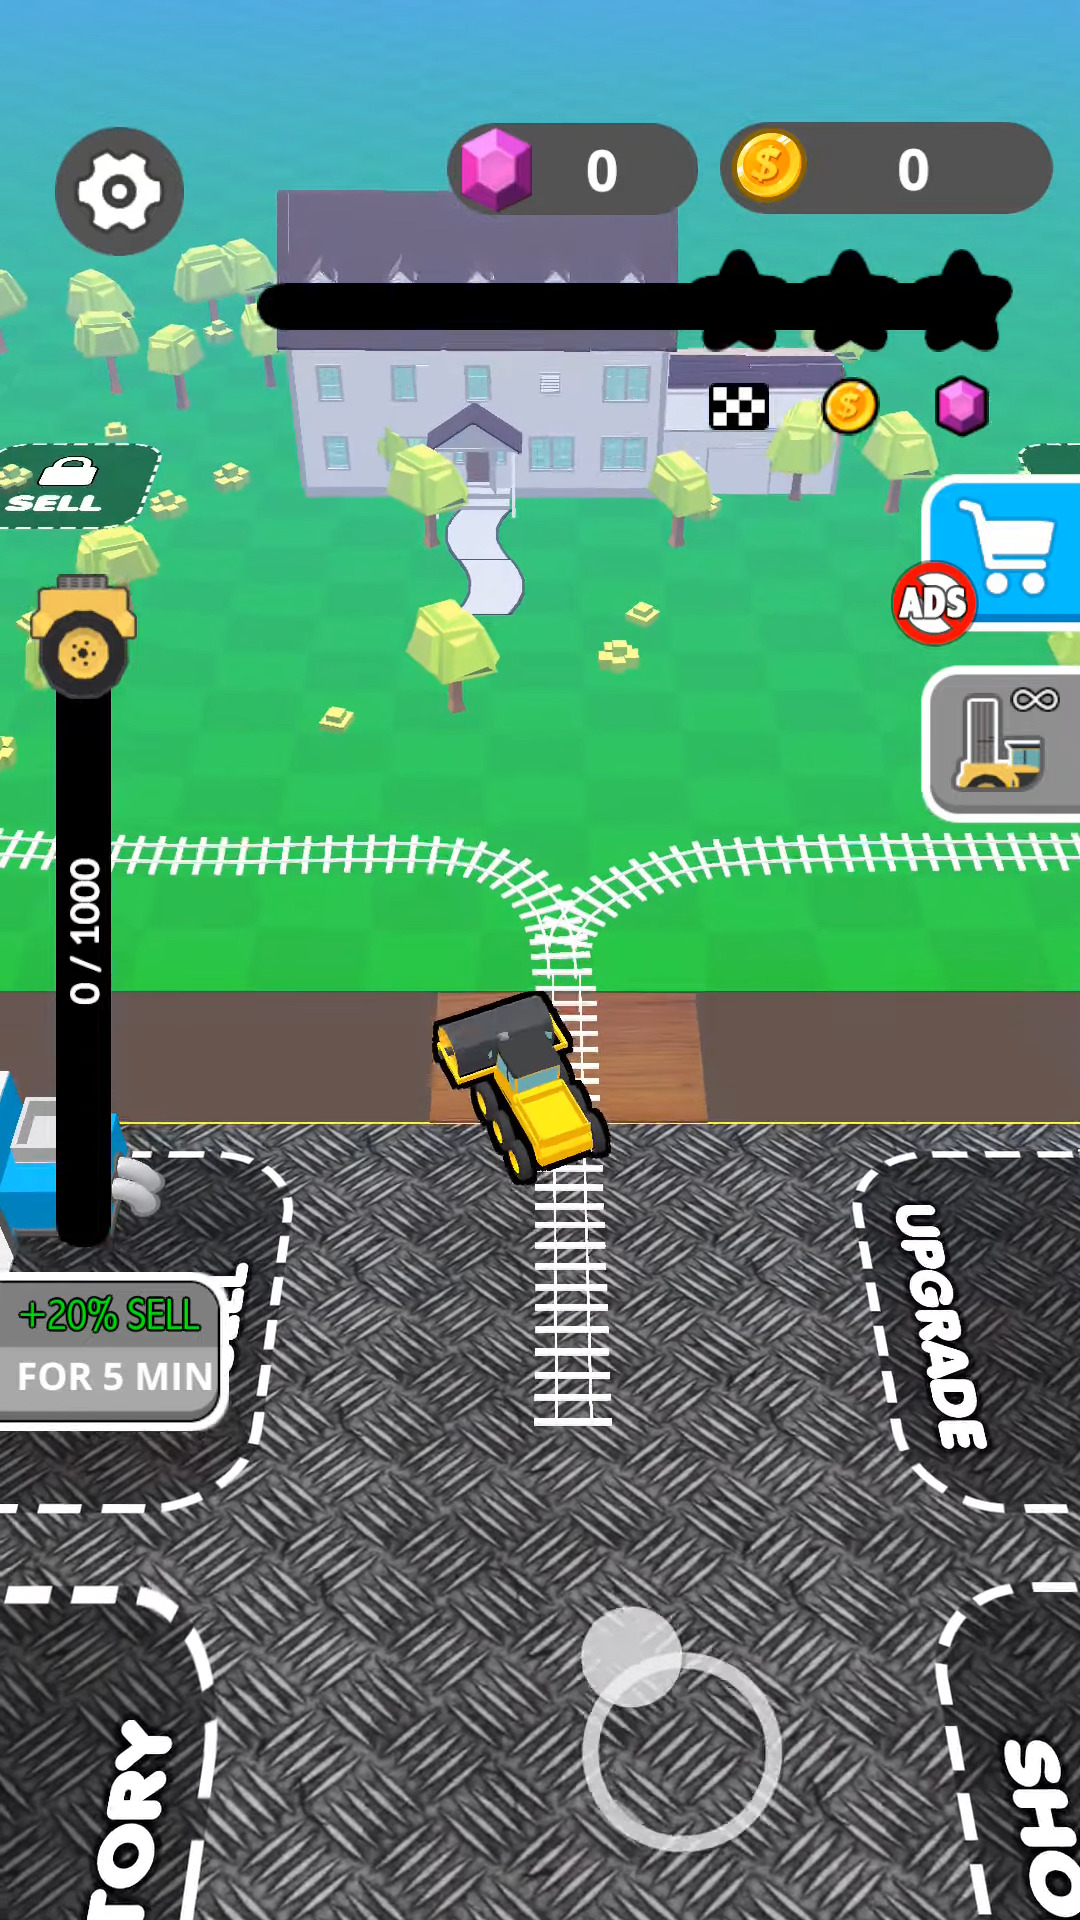 Full version of Android Arcade game apk Demolition Car! for tablet and phone.